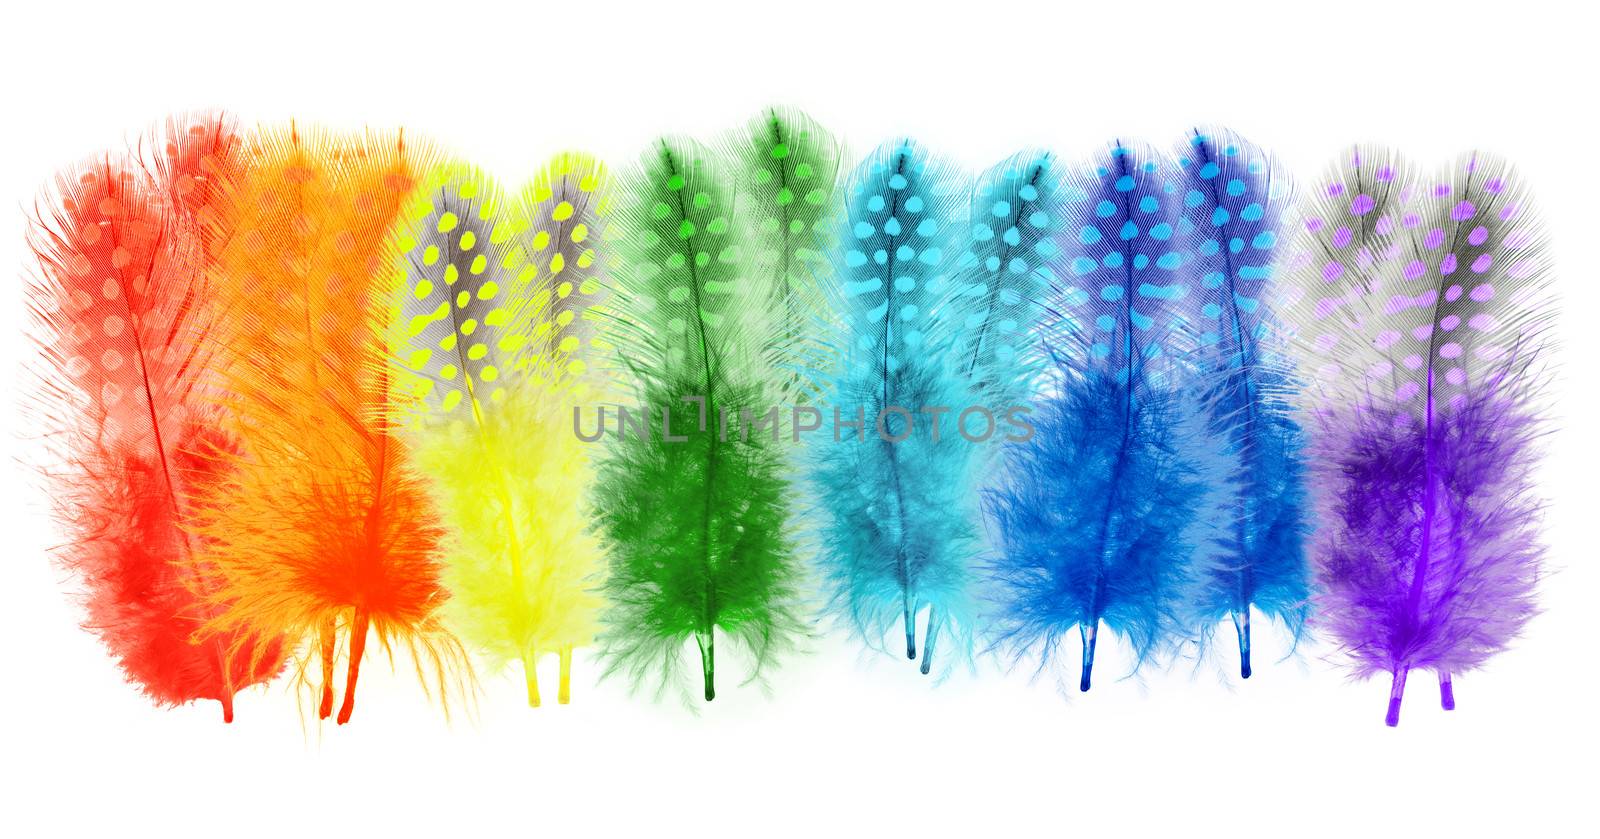 Guinea fowl feathers are painted in bright colors of the rainbow by AleksandrN